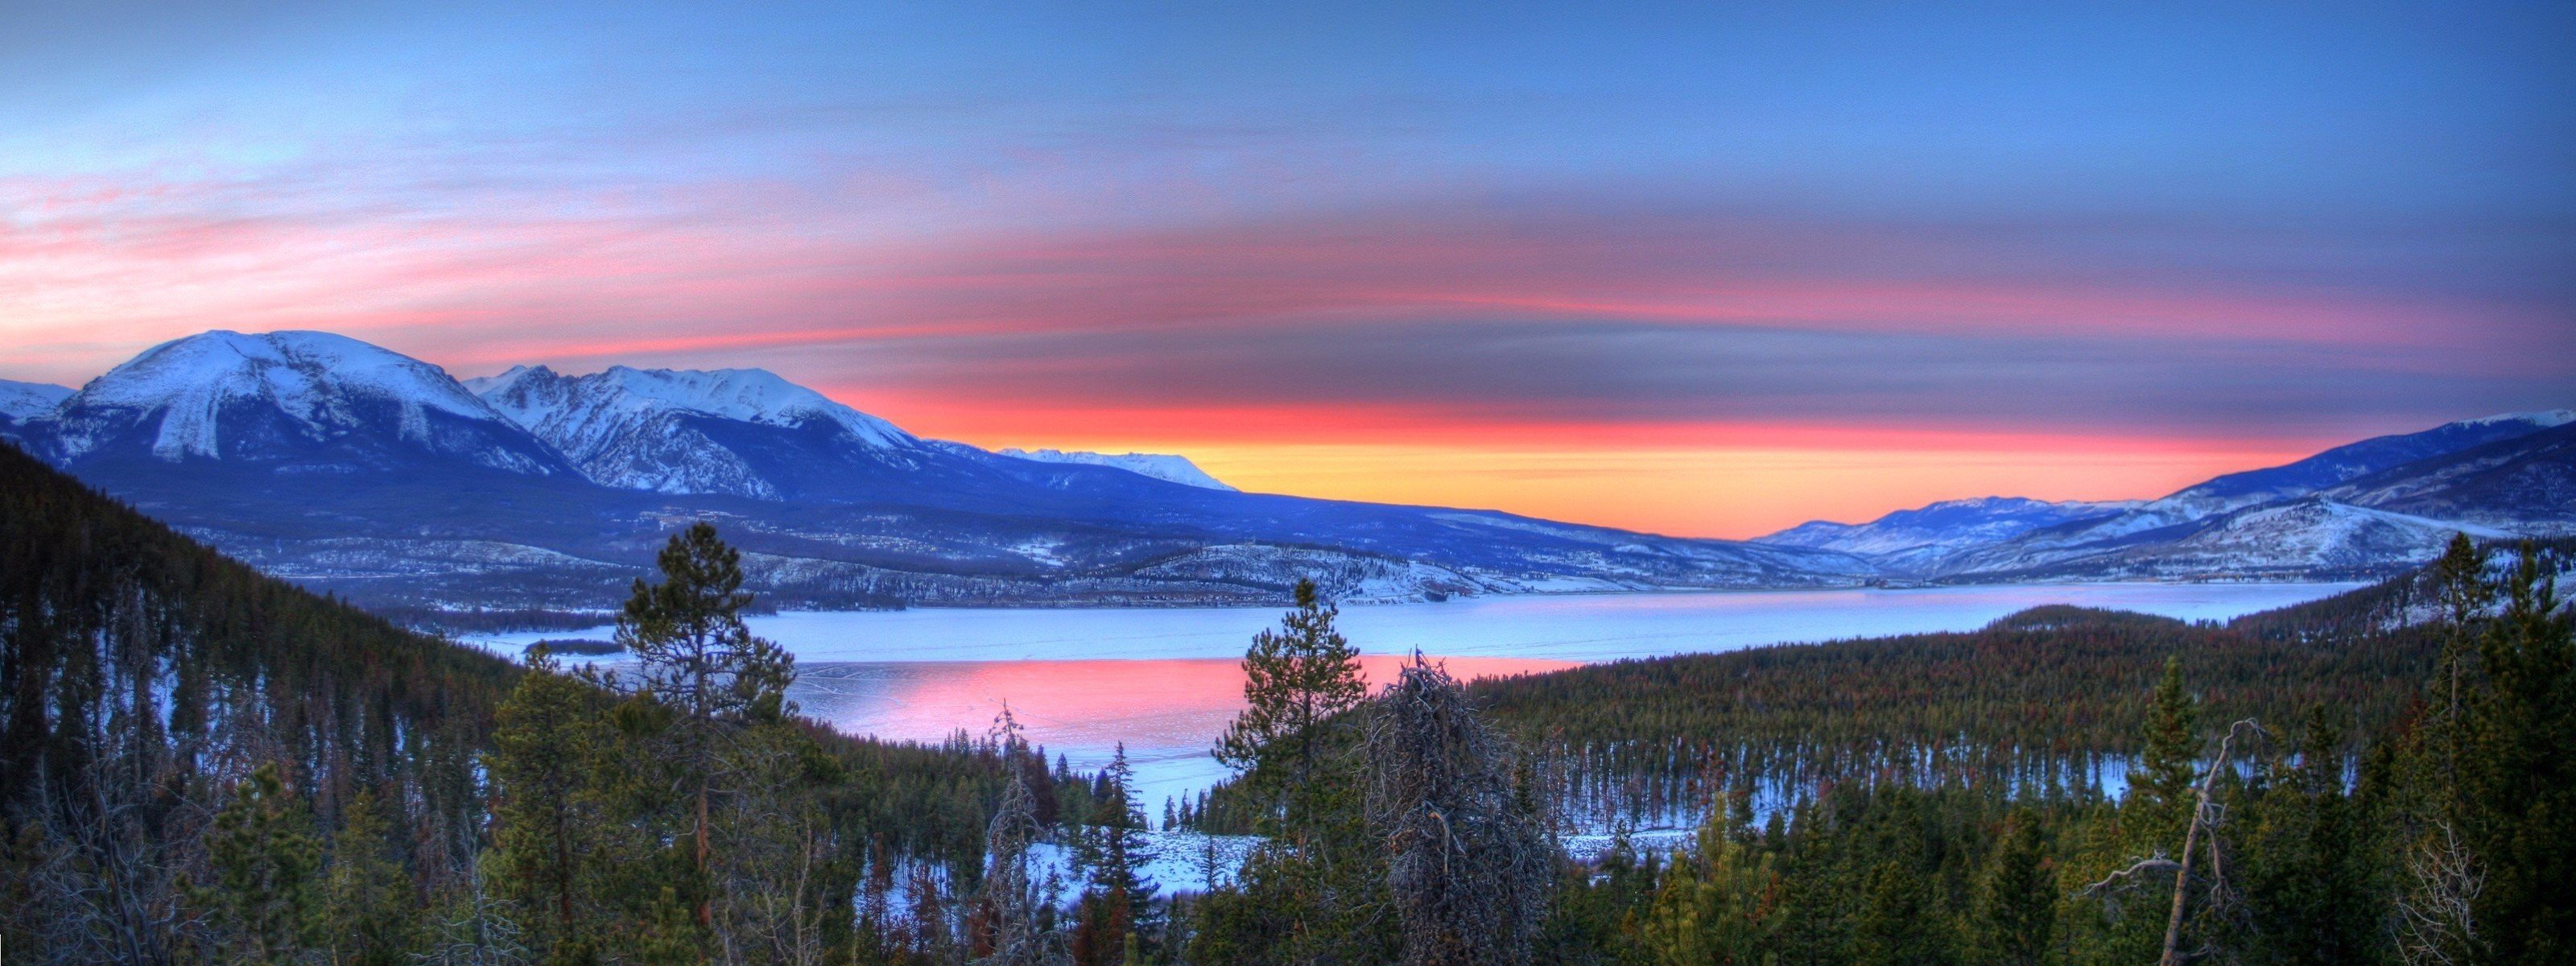 Best Winter Wallpaper Id - Lake With Sunset And Mountains - HD Wallpaper 